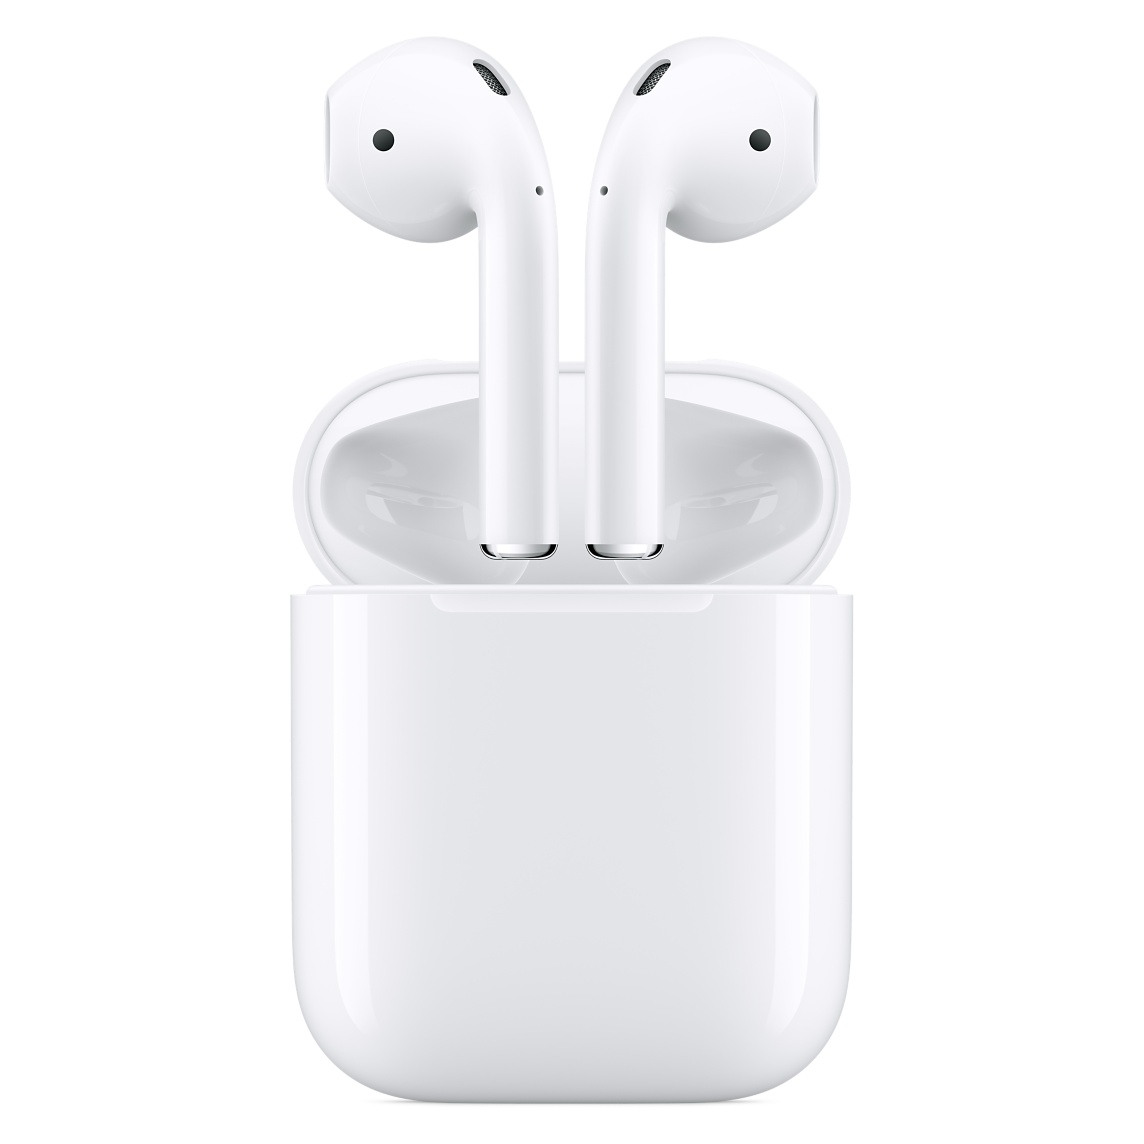 ｢AirPods｣、今度は11月30日発売説が浮上